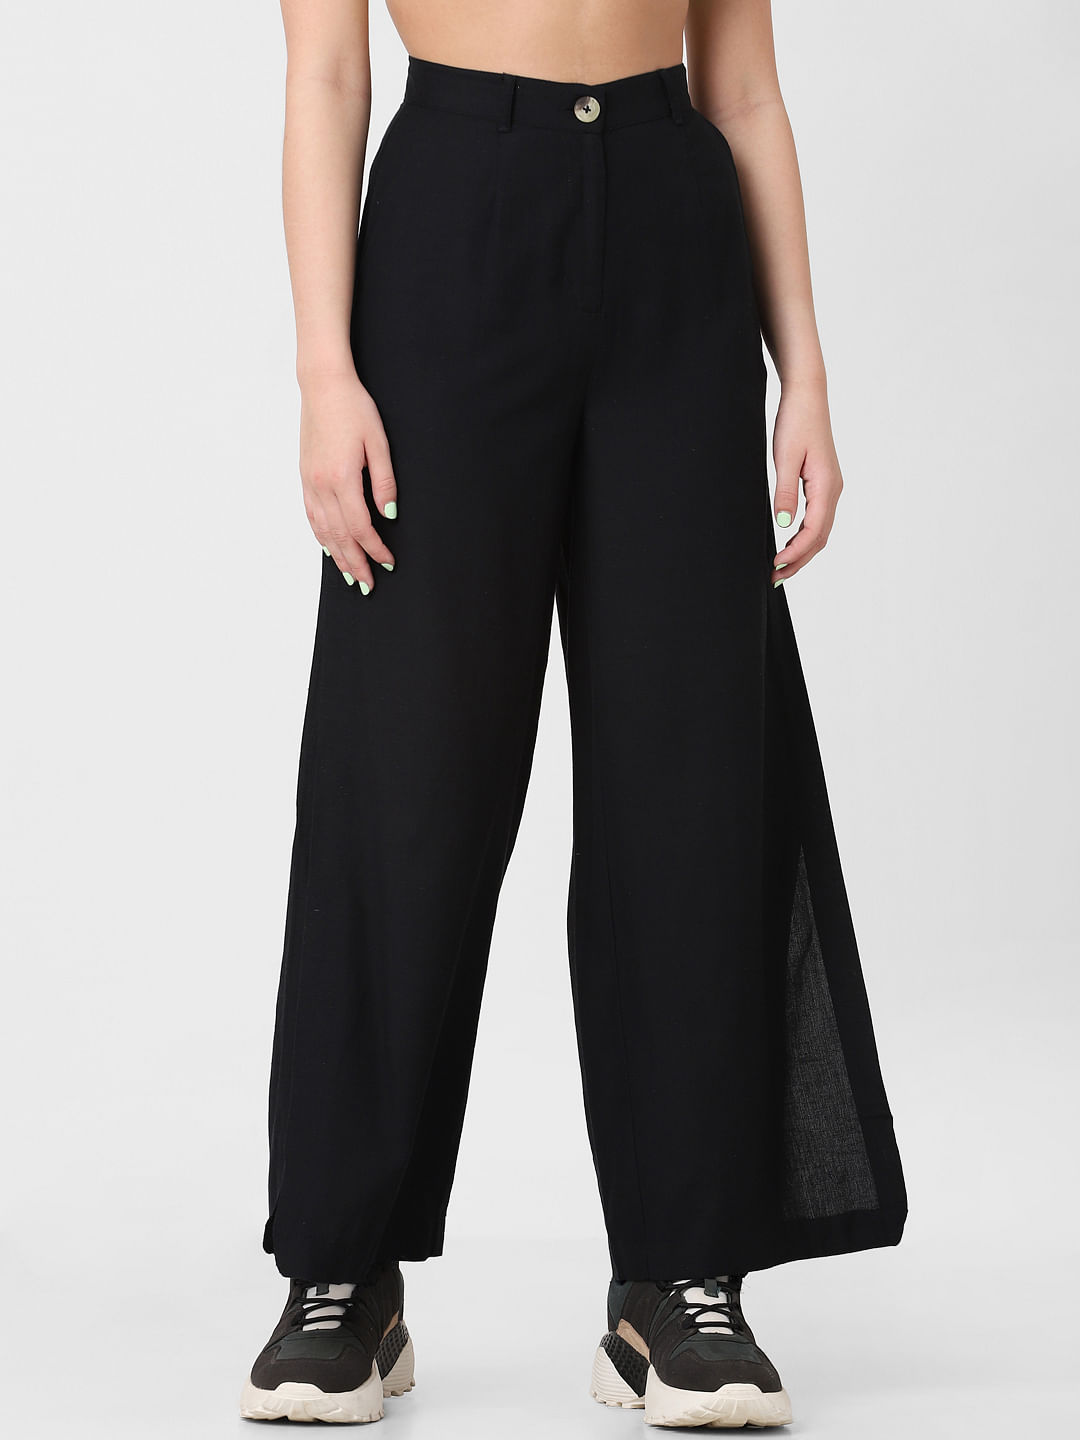 Go Colors Women Solid Cotton Wide Leg Pants  Black Buy Go Colors Women  Solid Cotton Wide Leg Pants  Black Online at Best Price in India  Nykaa